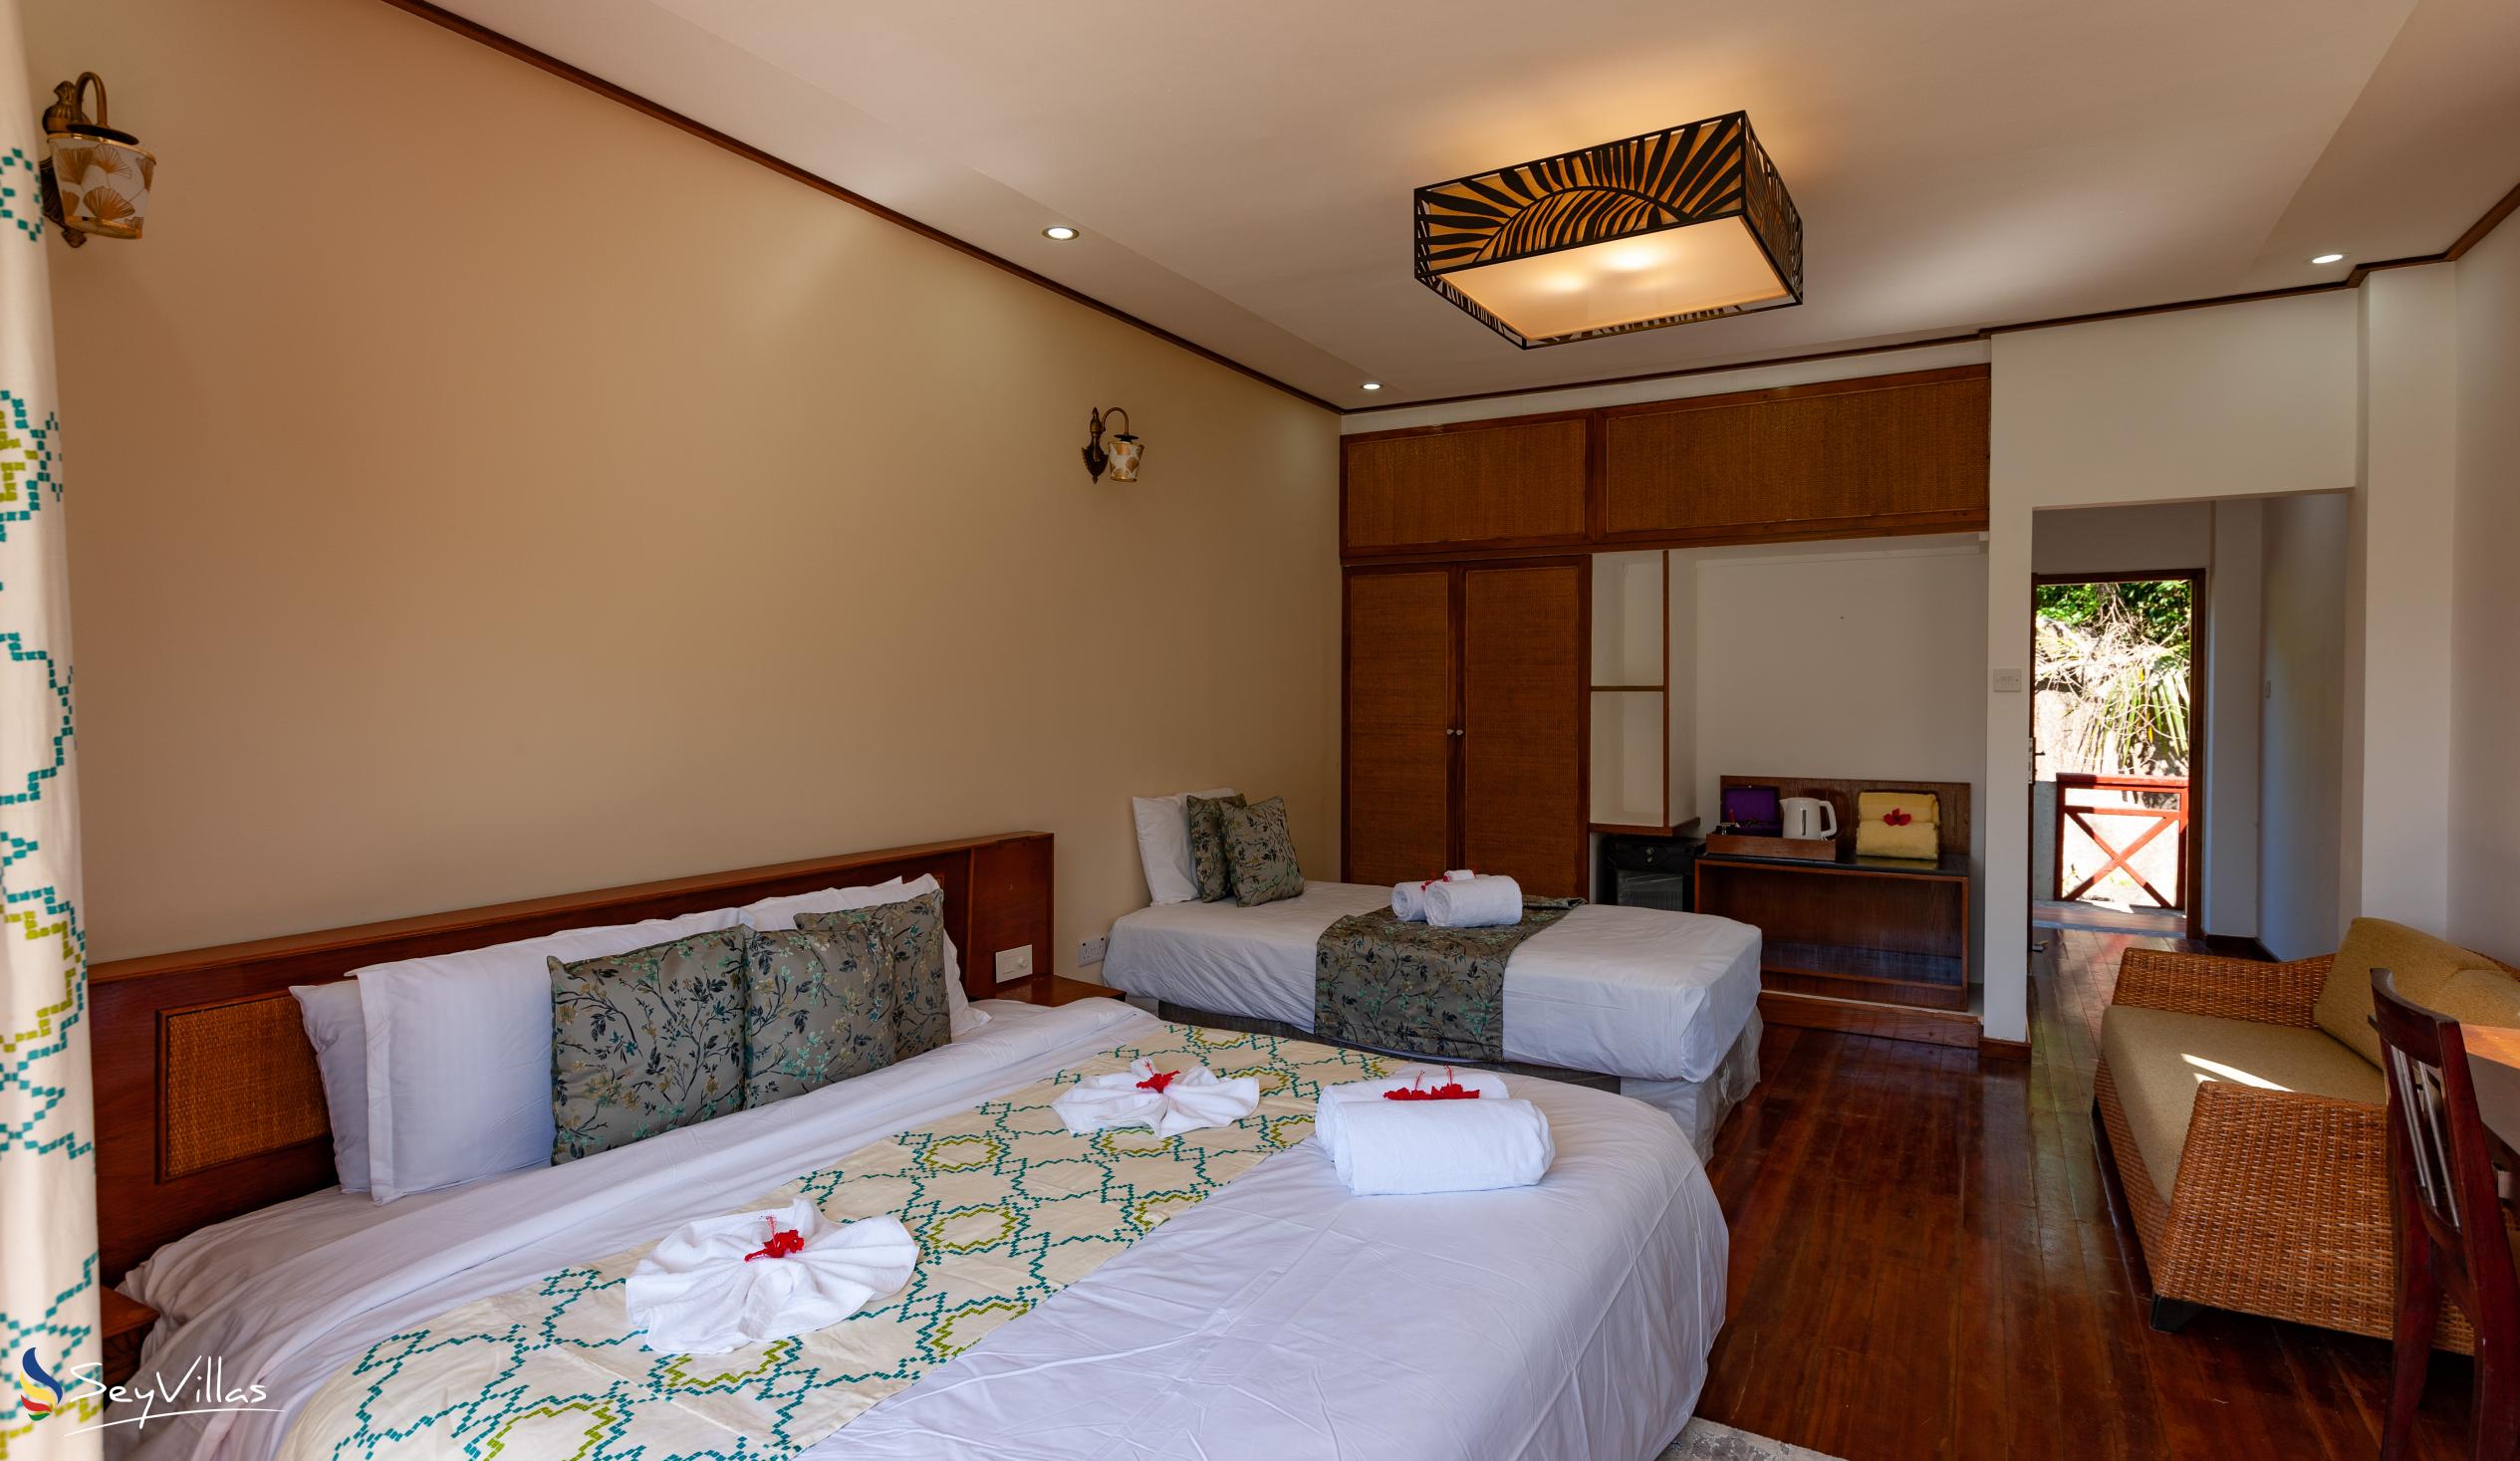 Photo 33: Mountain View Hotel - Family Room - La Digue (Seychelles)